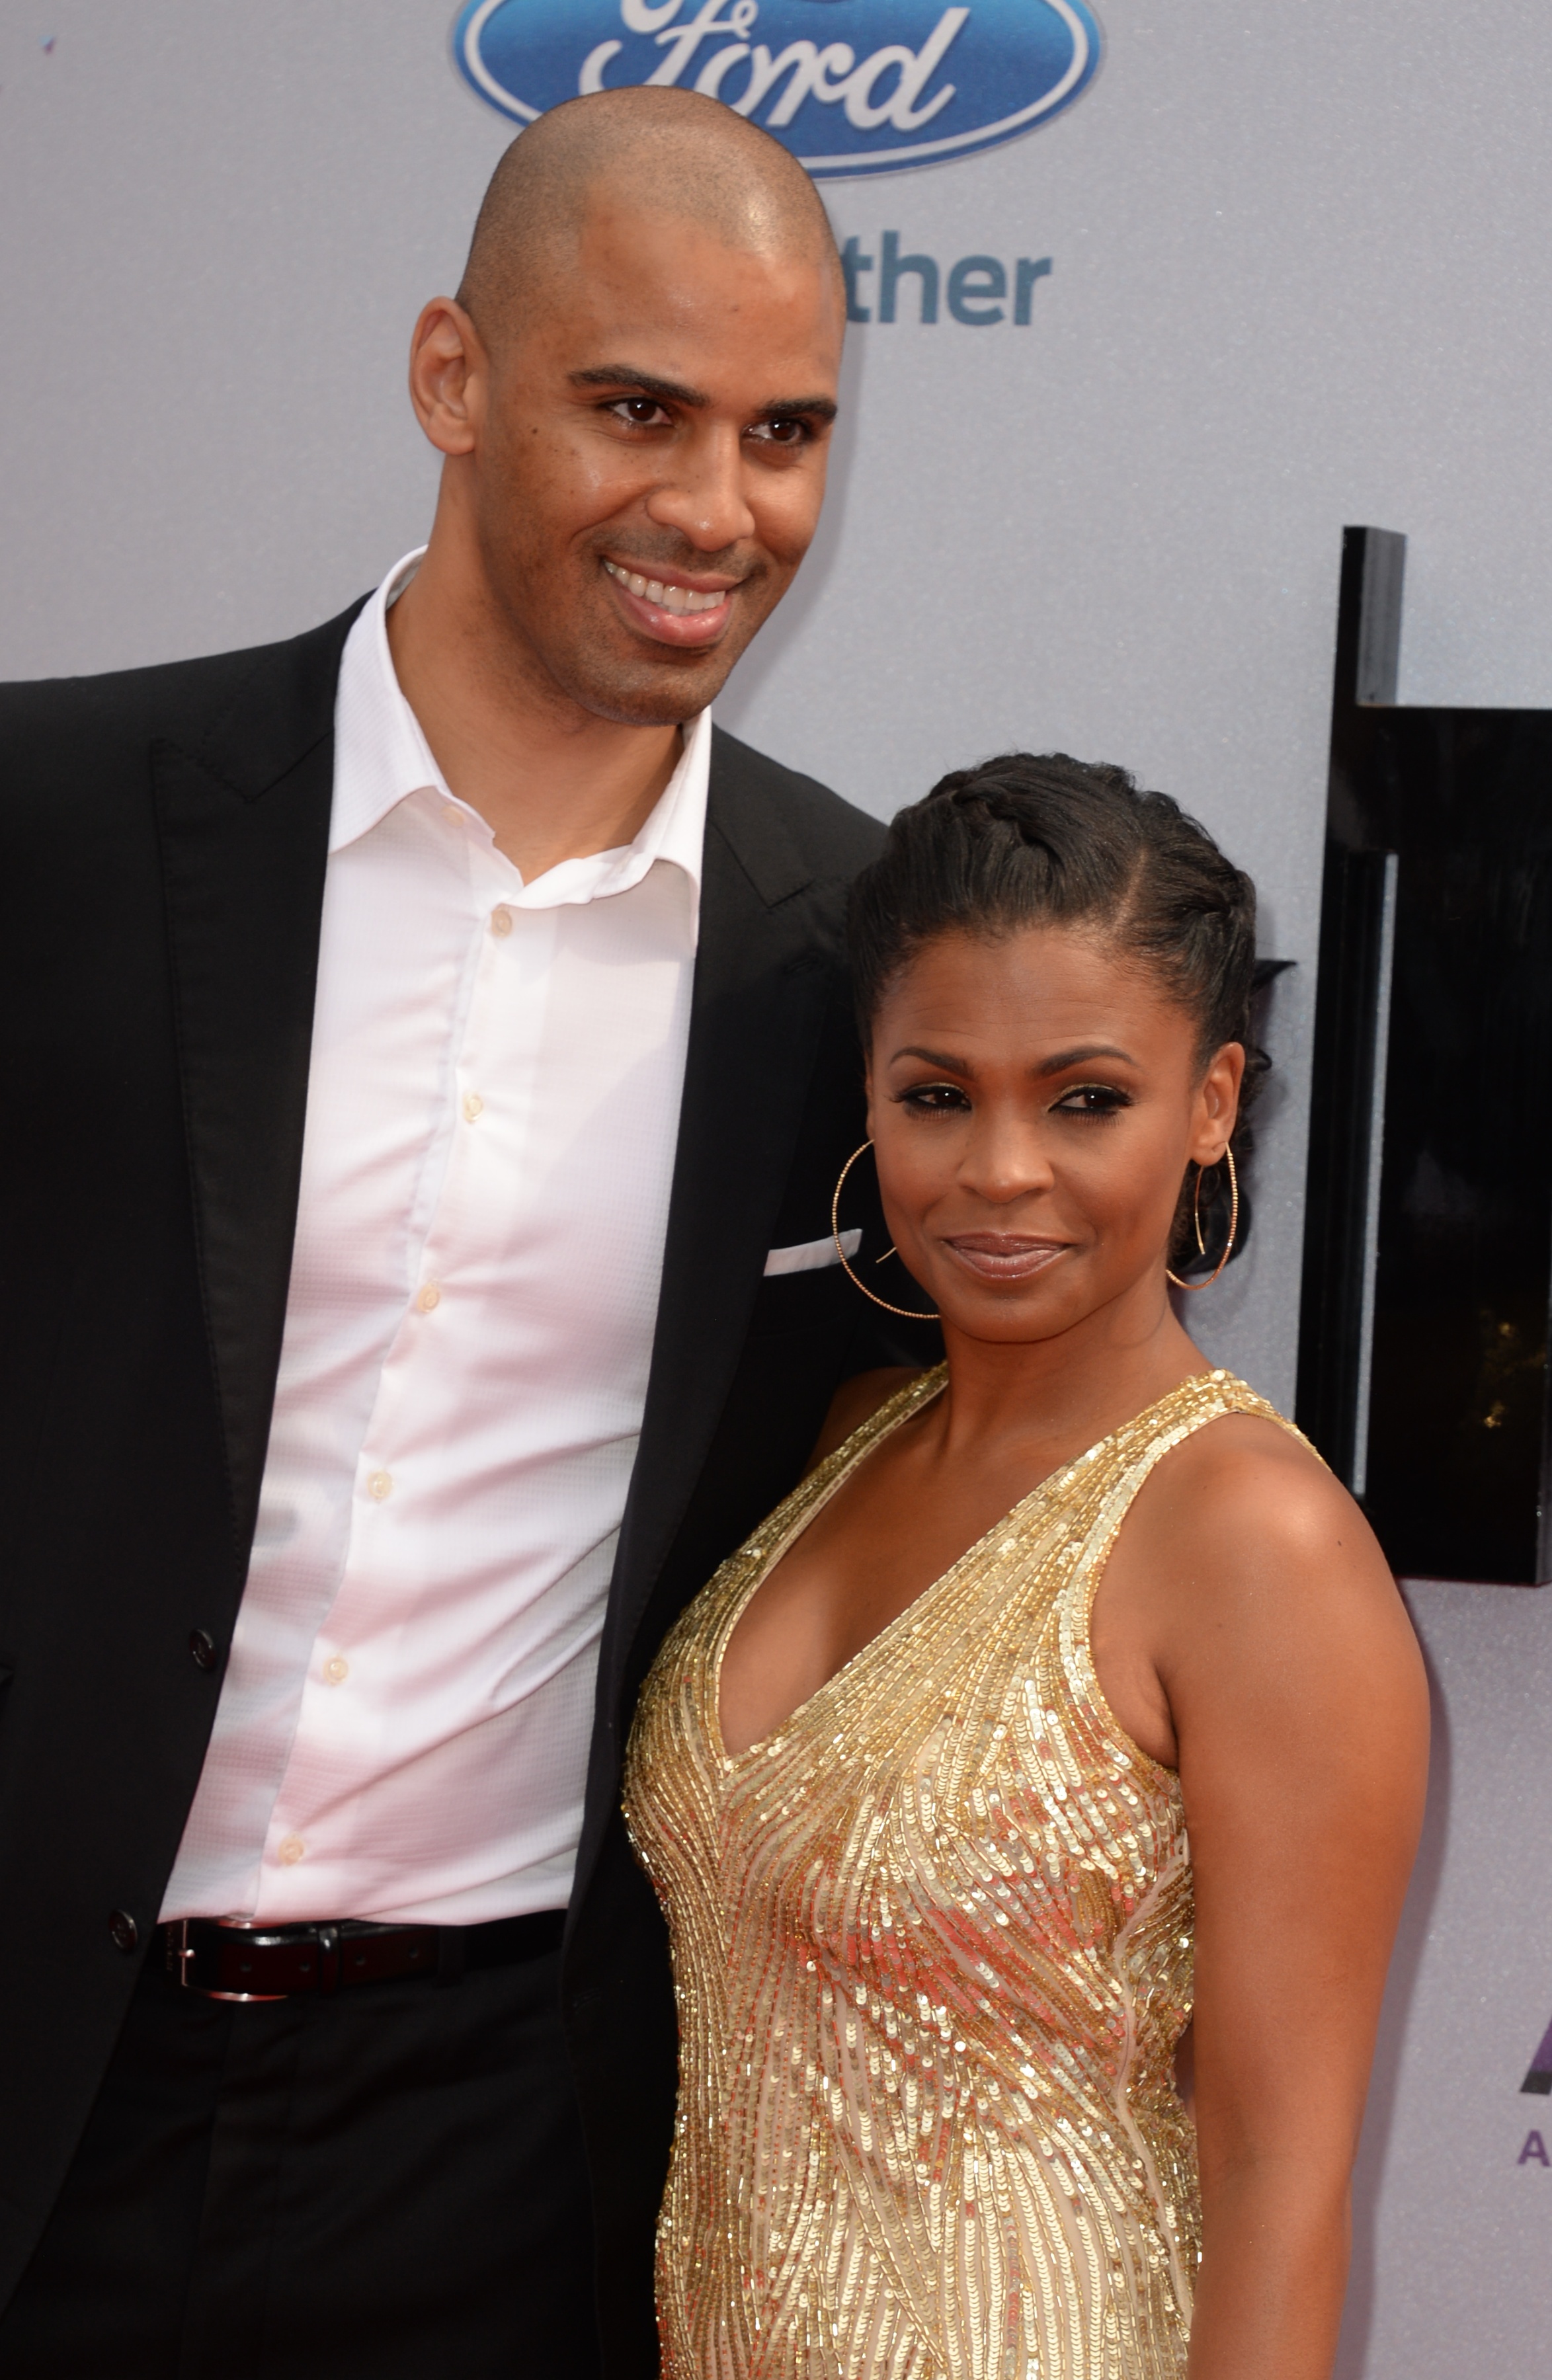 Nia Long, who is older than Ime Udoka, posing together on the red carpet at BET Awards